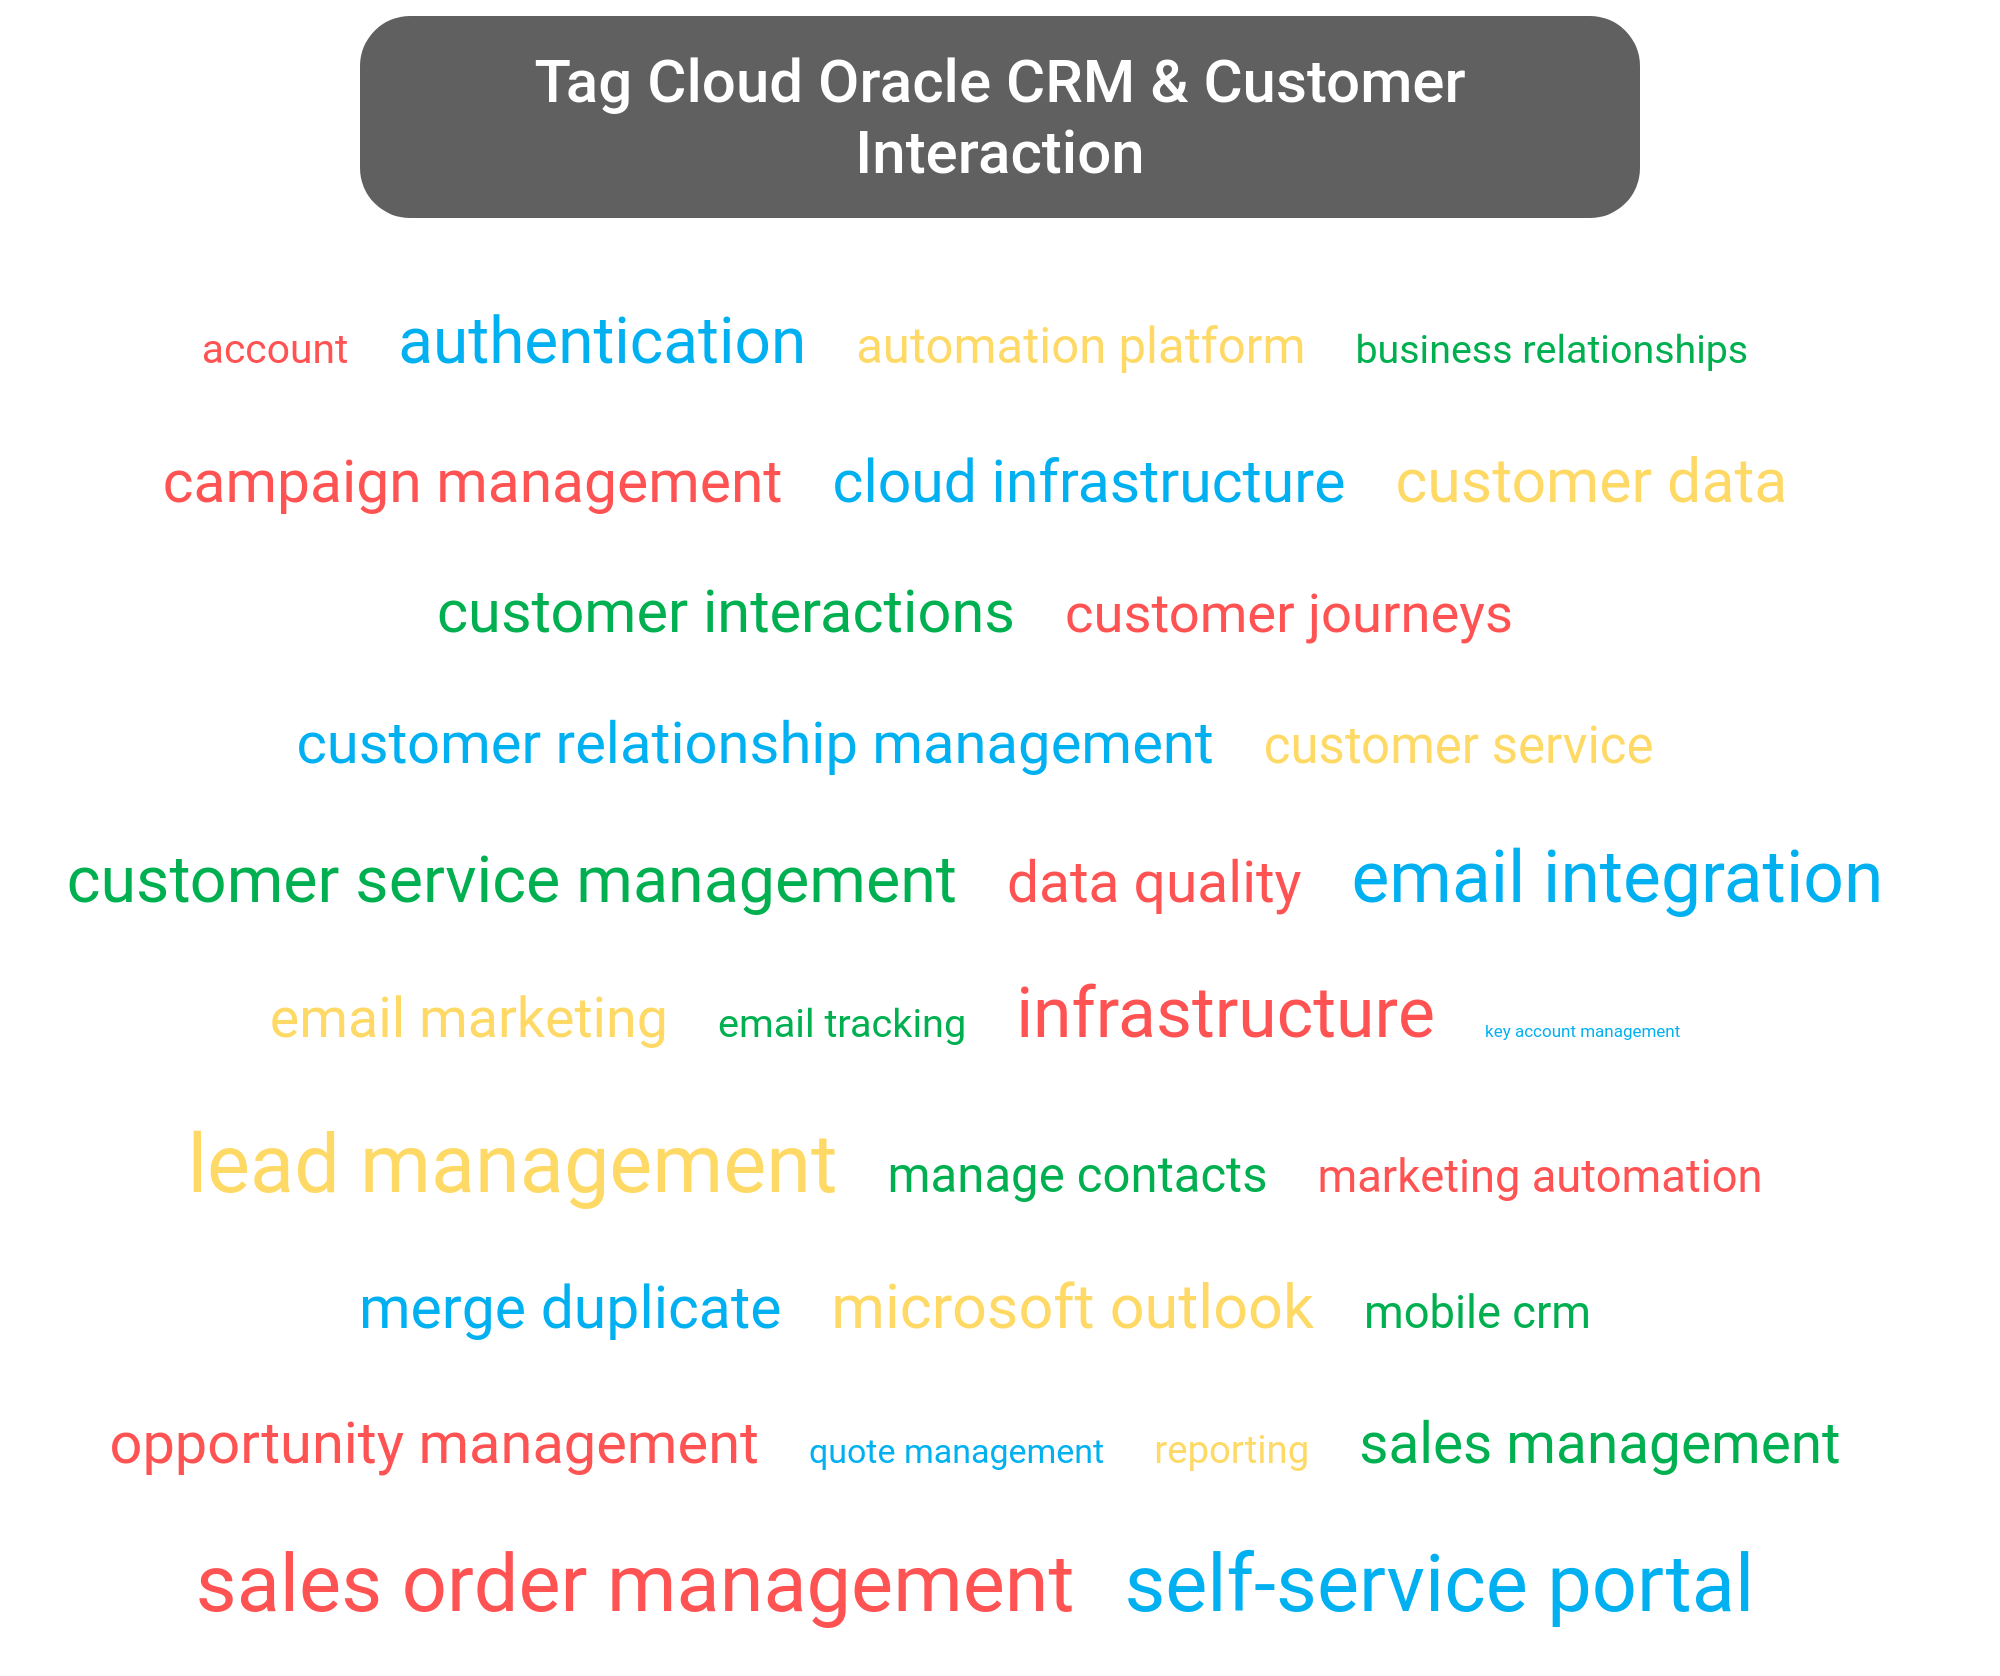 Tag cloud of the Oracle CRM tools.